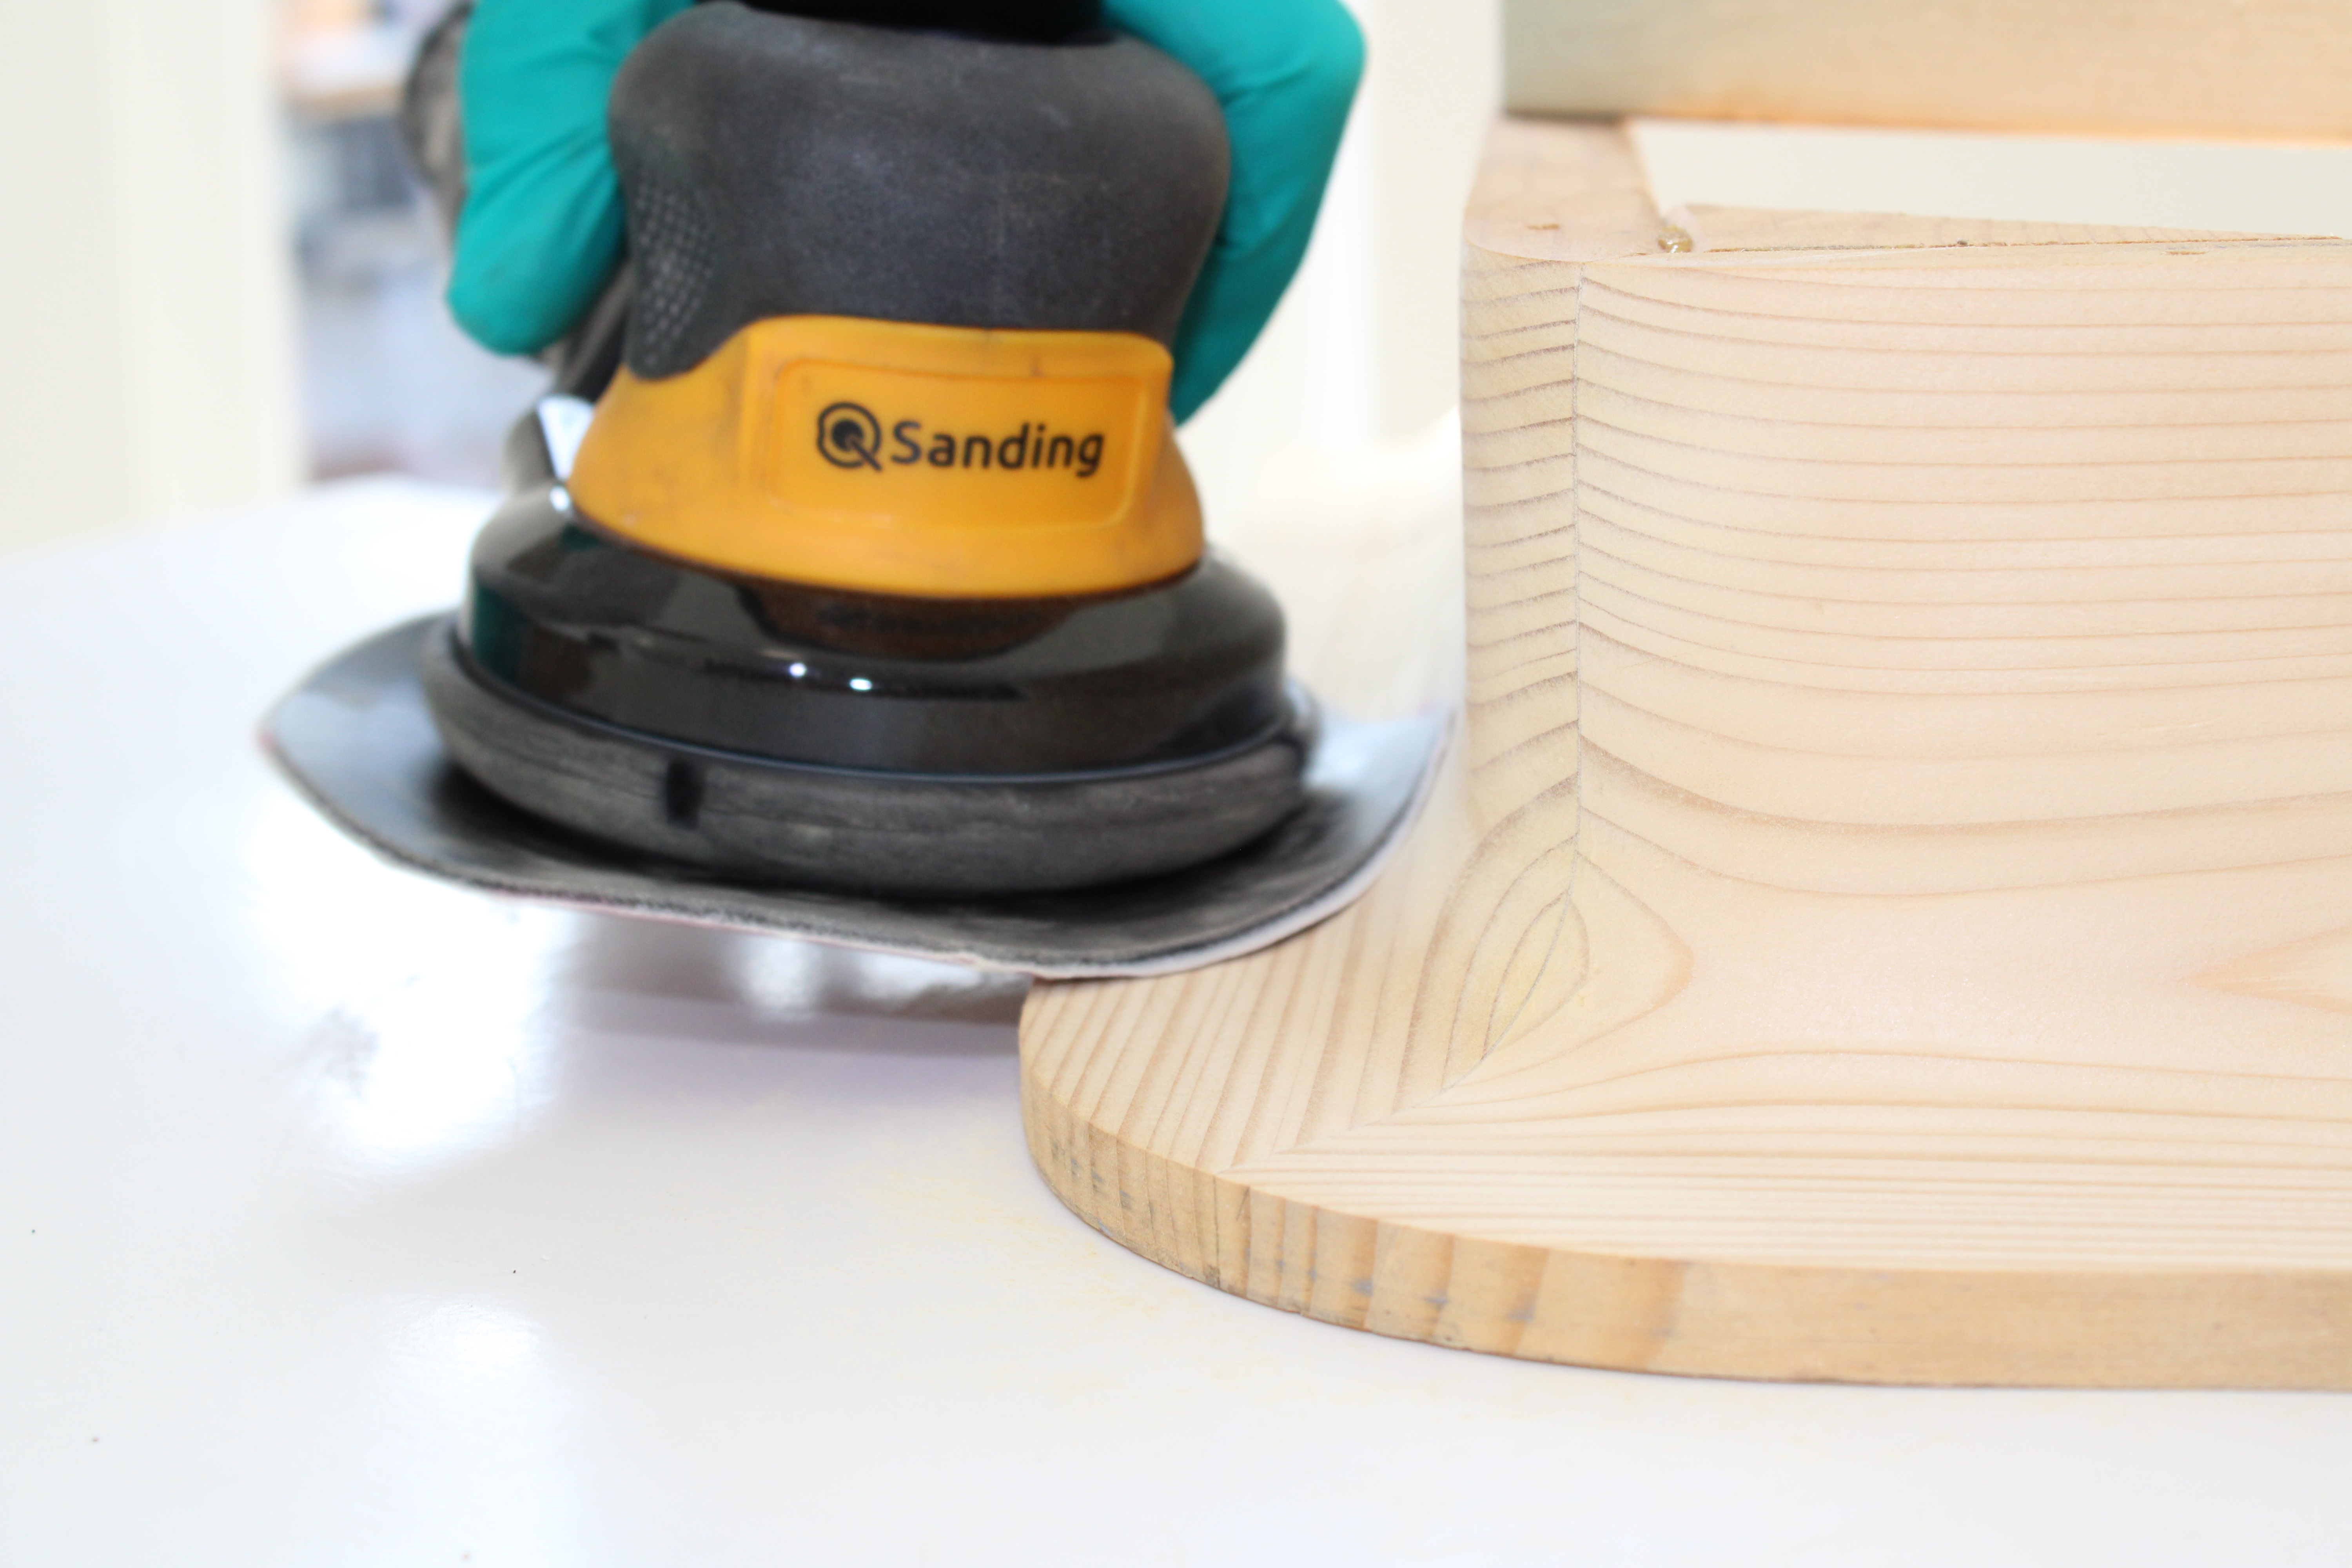 Q Sander with flexible edge on the backing pad